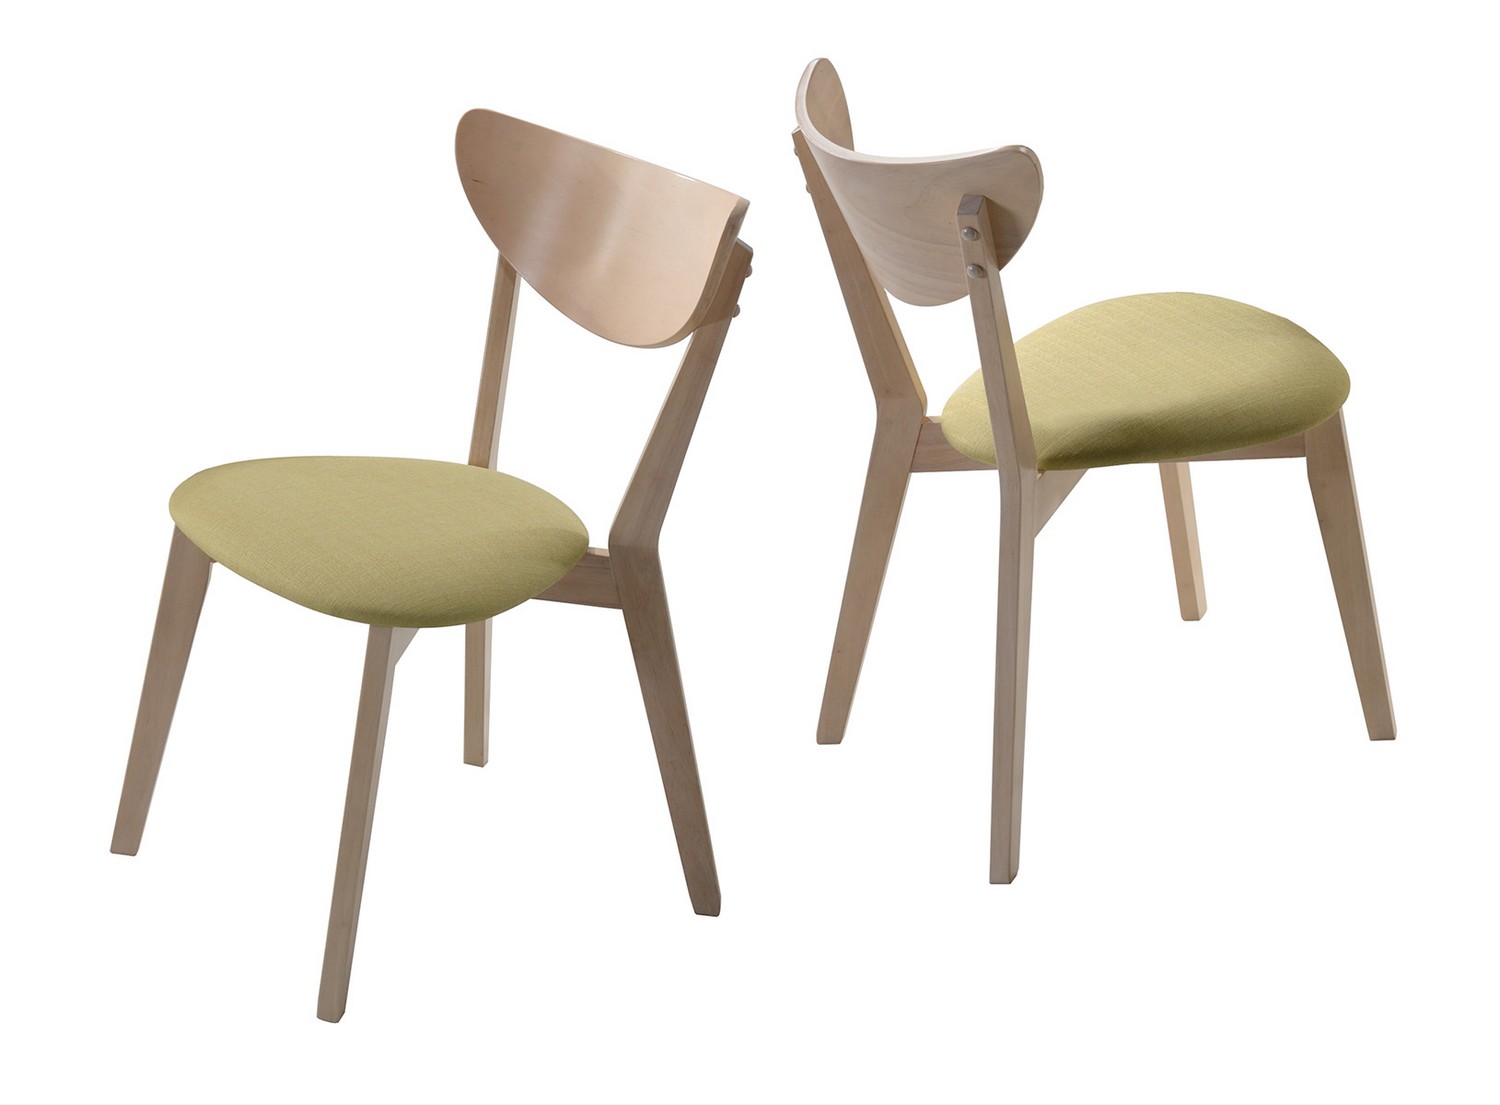 Coaster Appel Side Chair - White - White Wash/Pale Green Fabric